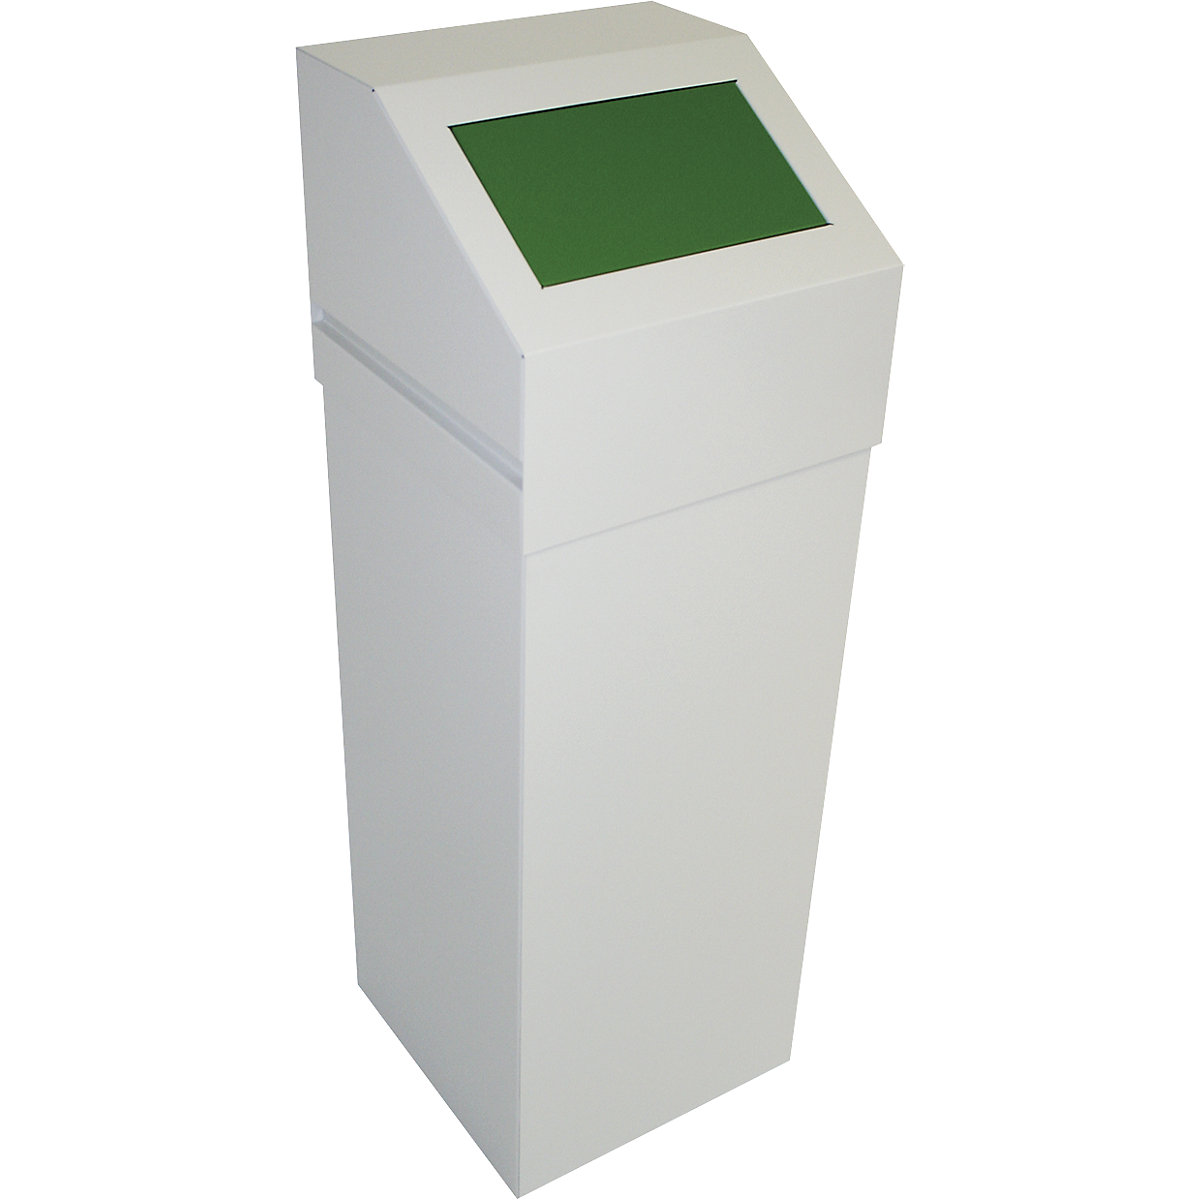 Steel recyclable waste collector